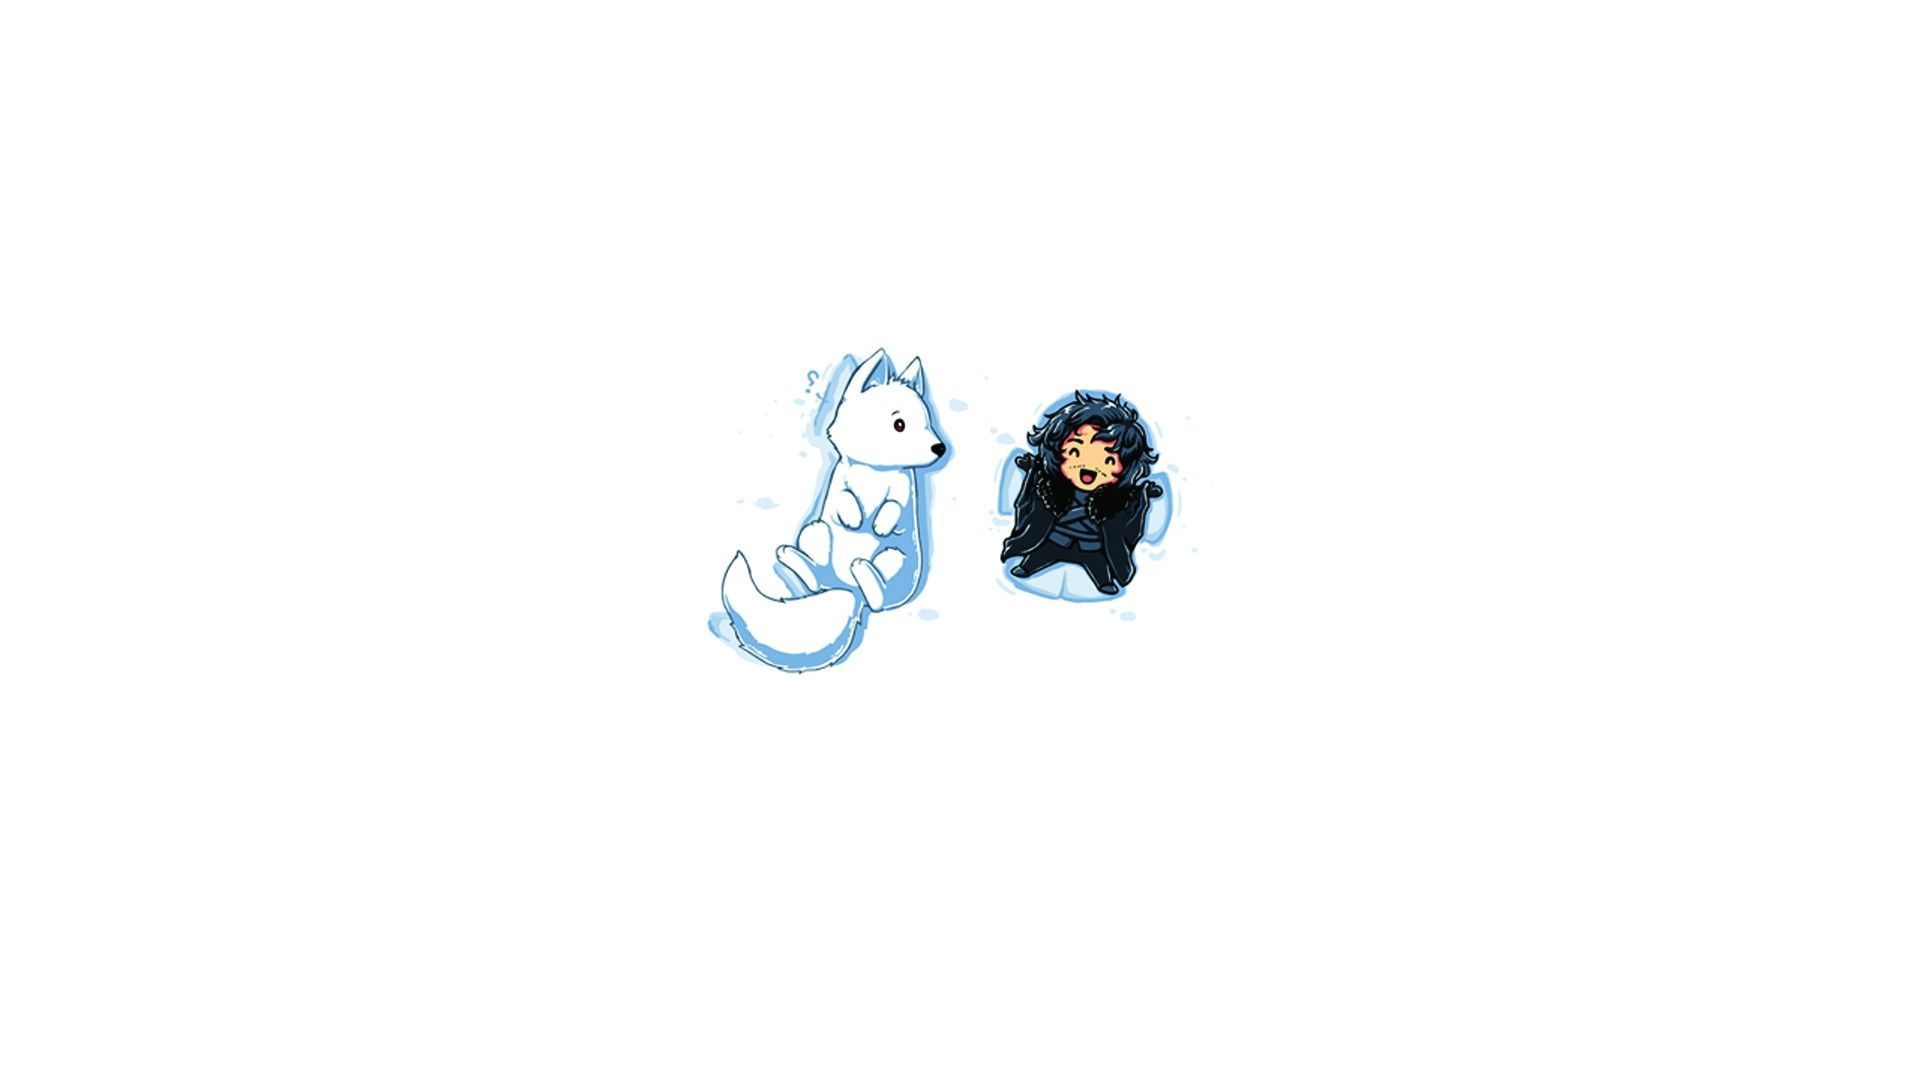 Ghost and Jon Snow Cartoon Game Of Thrones Wallpapers 1920x1080